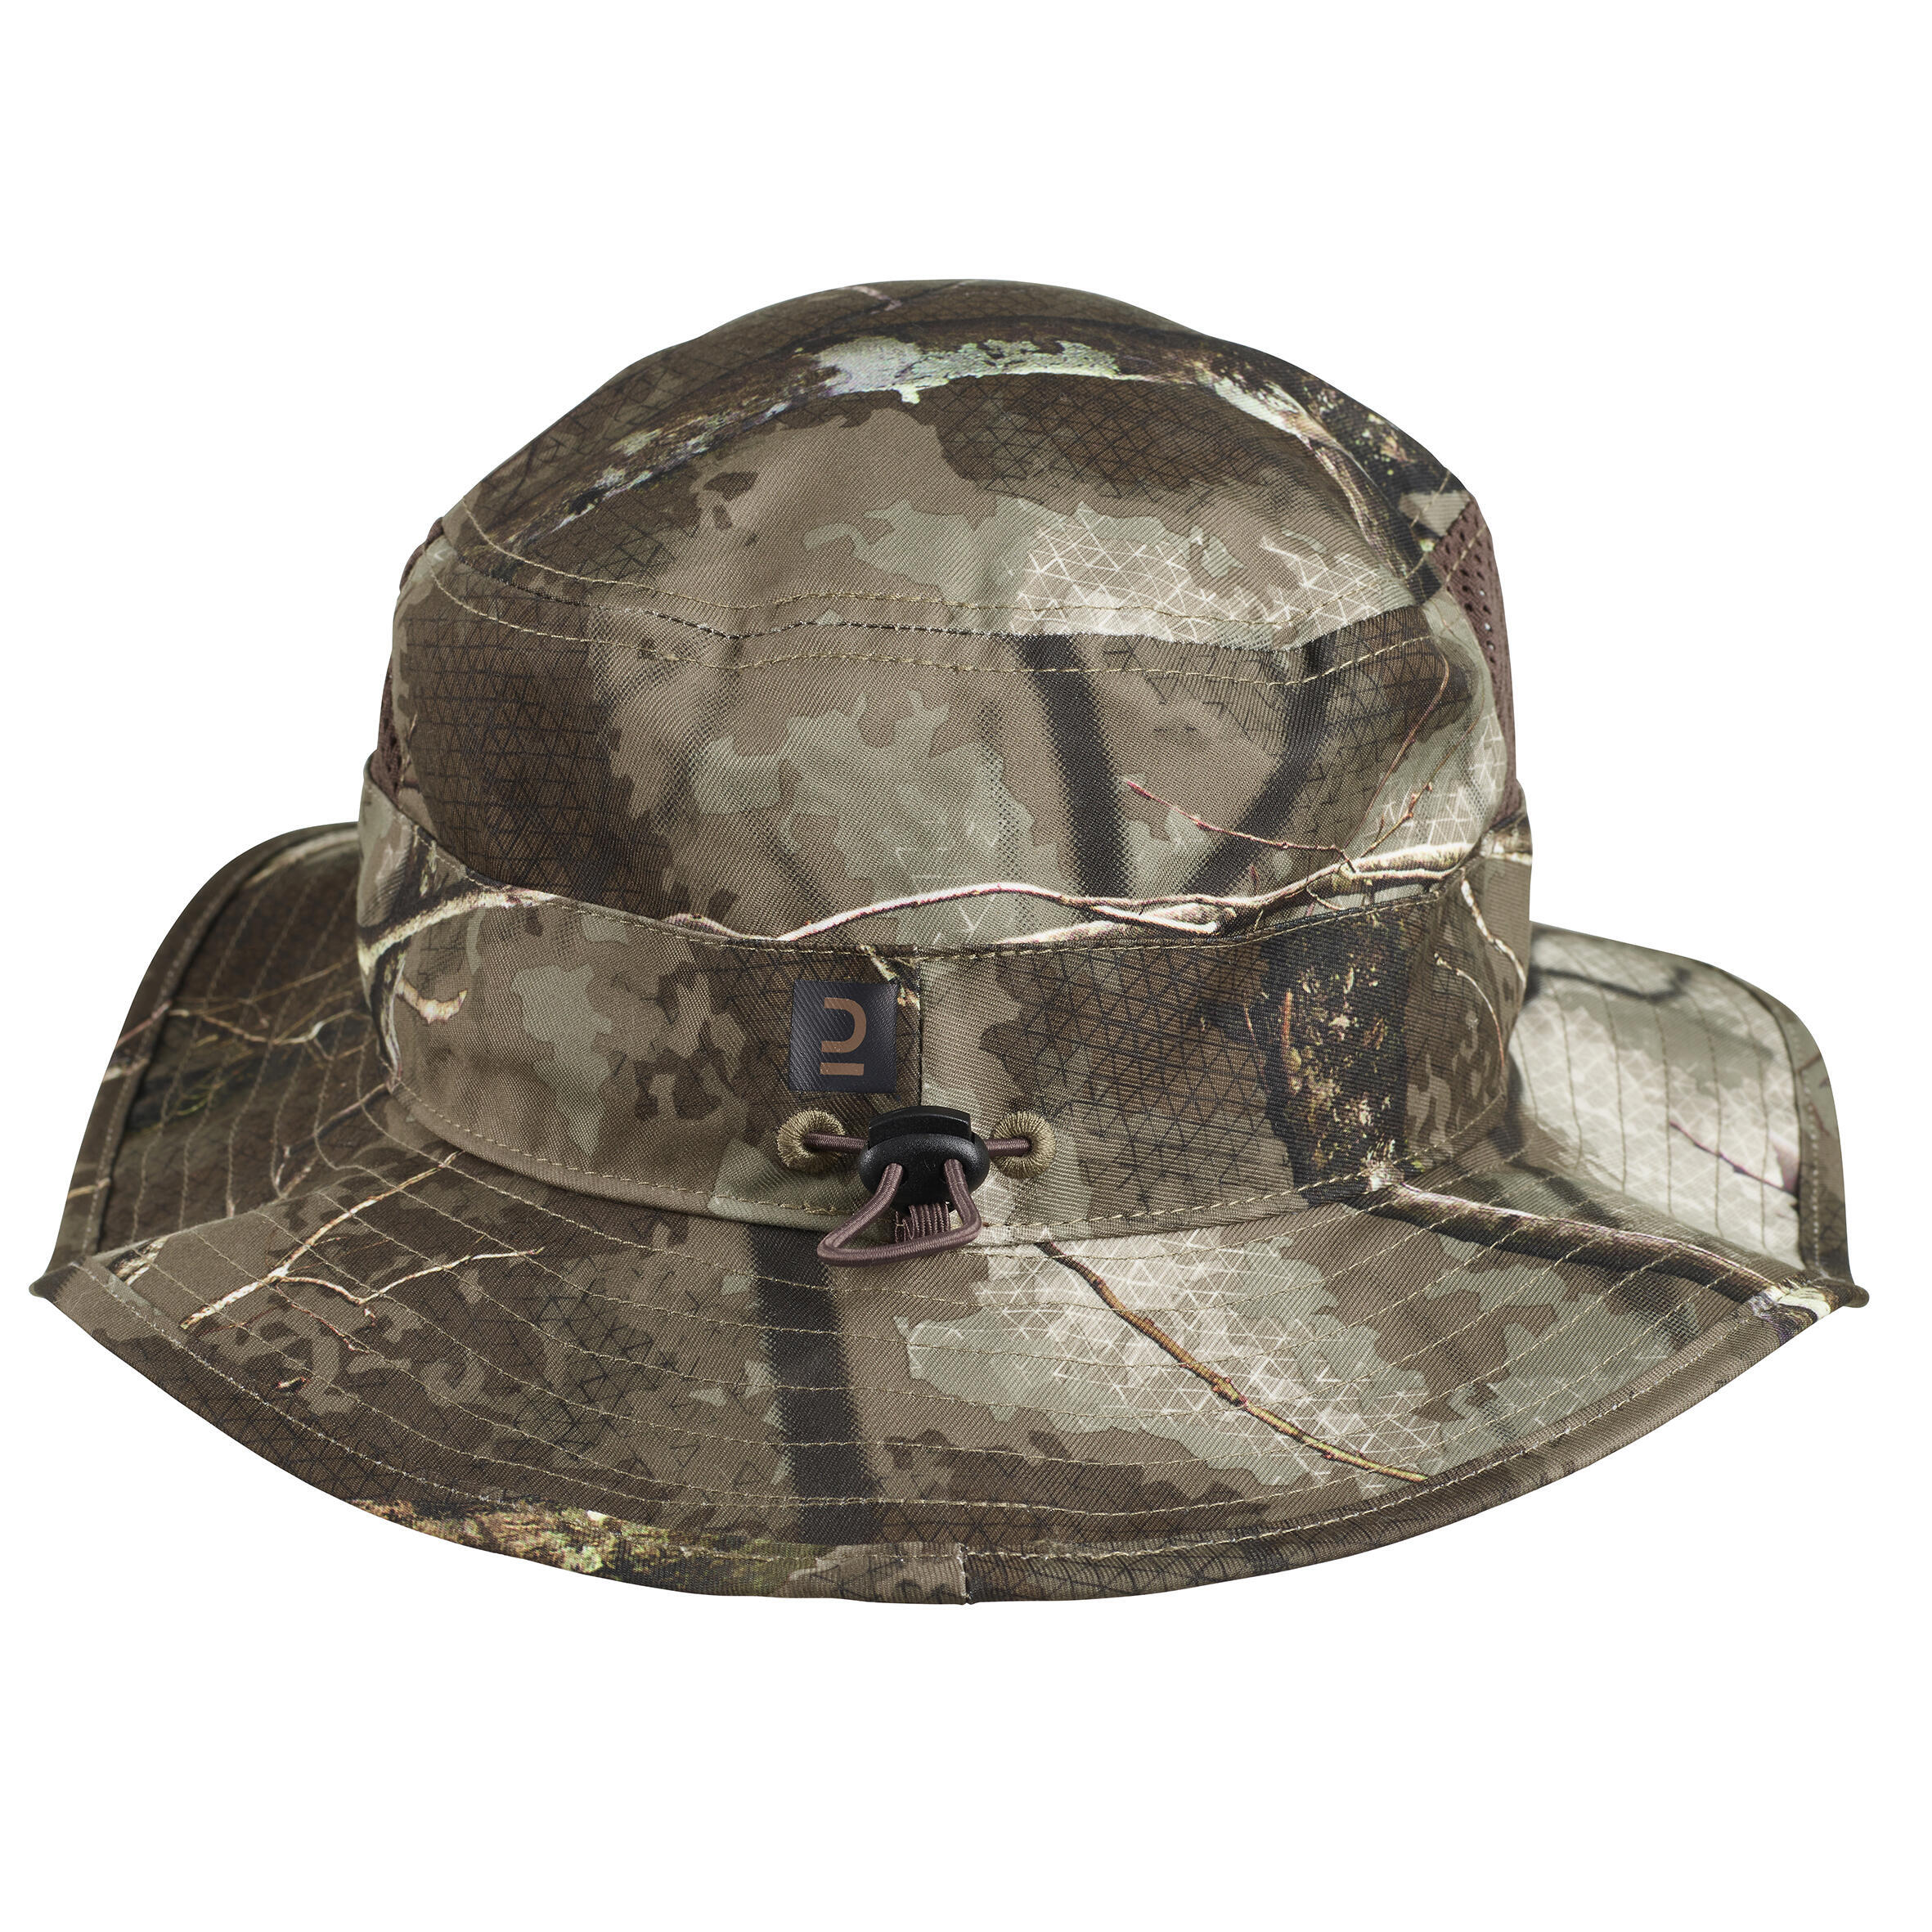 Breathable Country Sport Bob Hat Treemetic 500 Camouflage 4/10